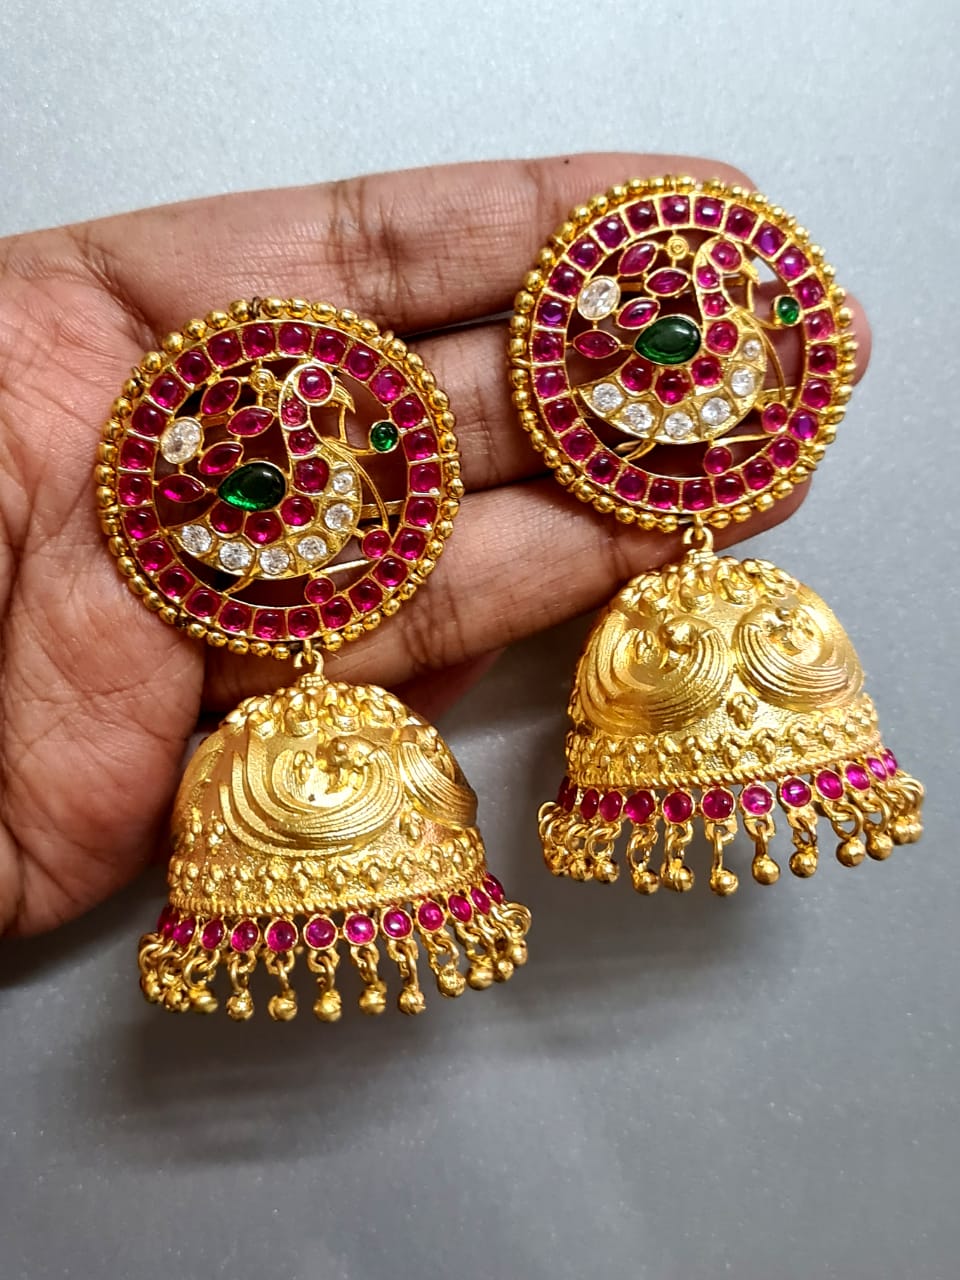 Add some JINGLE to your life with jhumkas !! #ethnicwear #traditional # jhumka #indianwear #kurti #instagram #instagood | Instagram